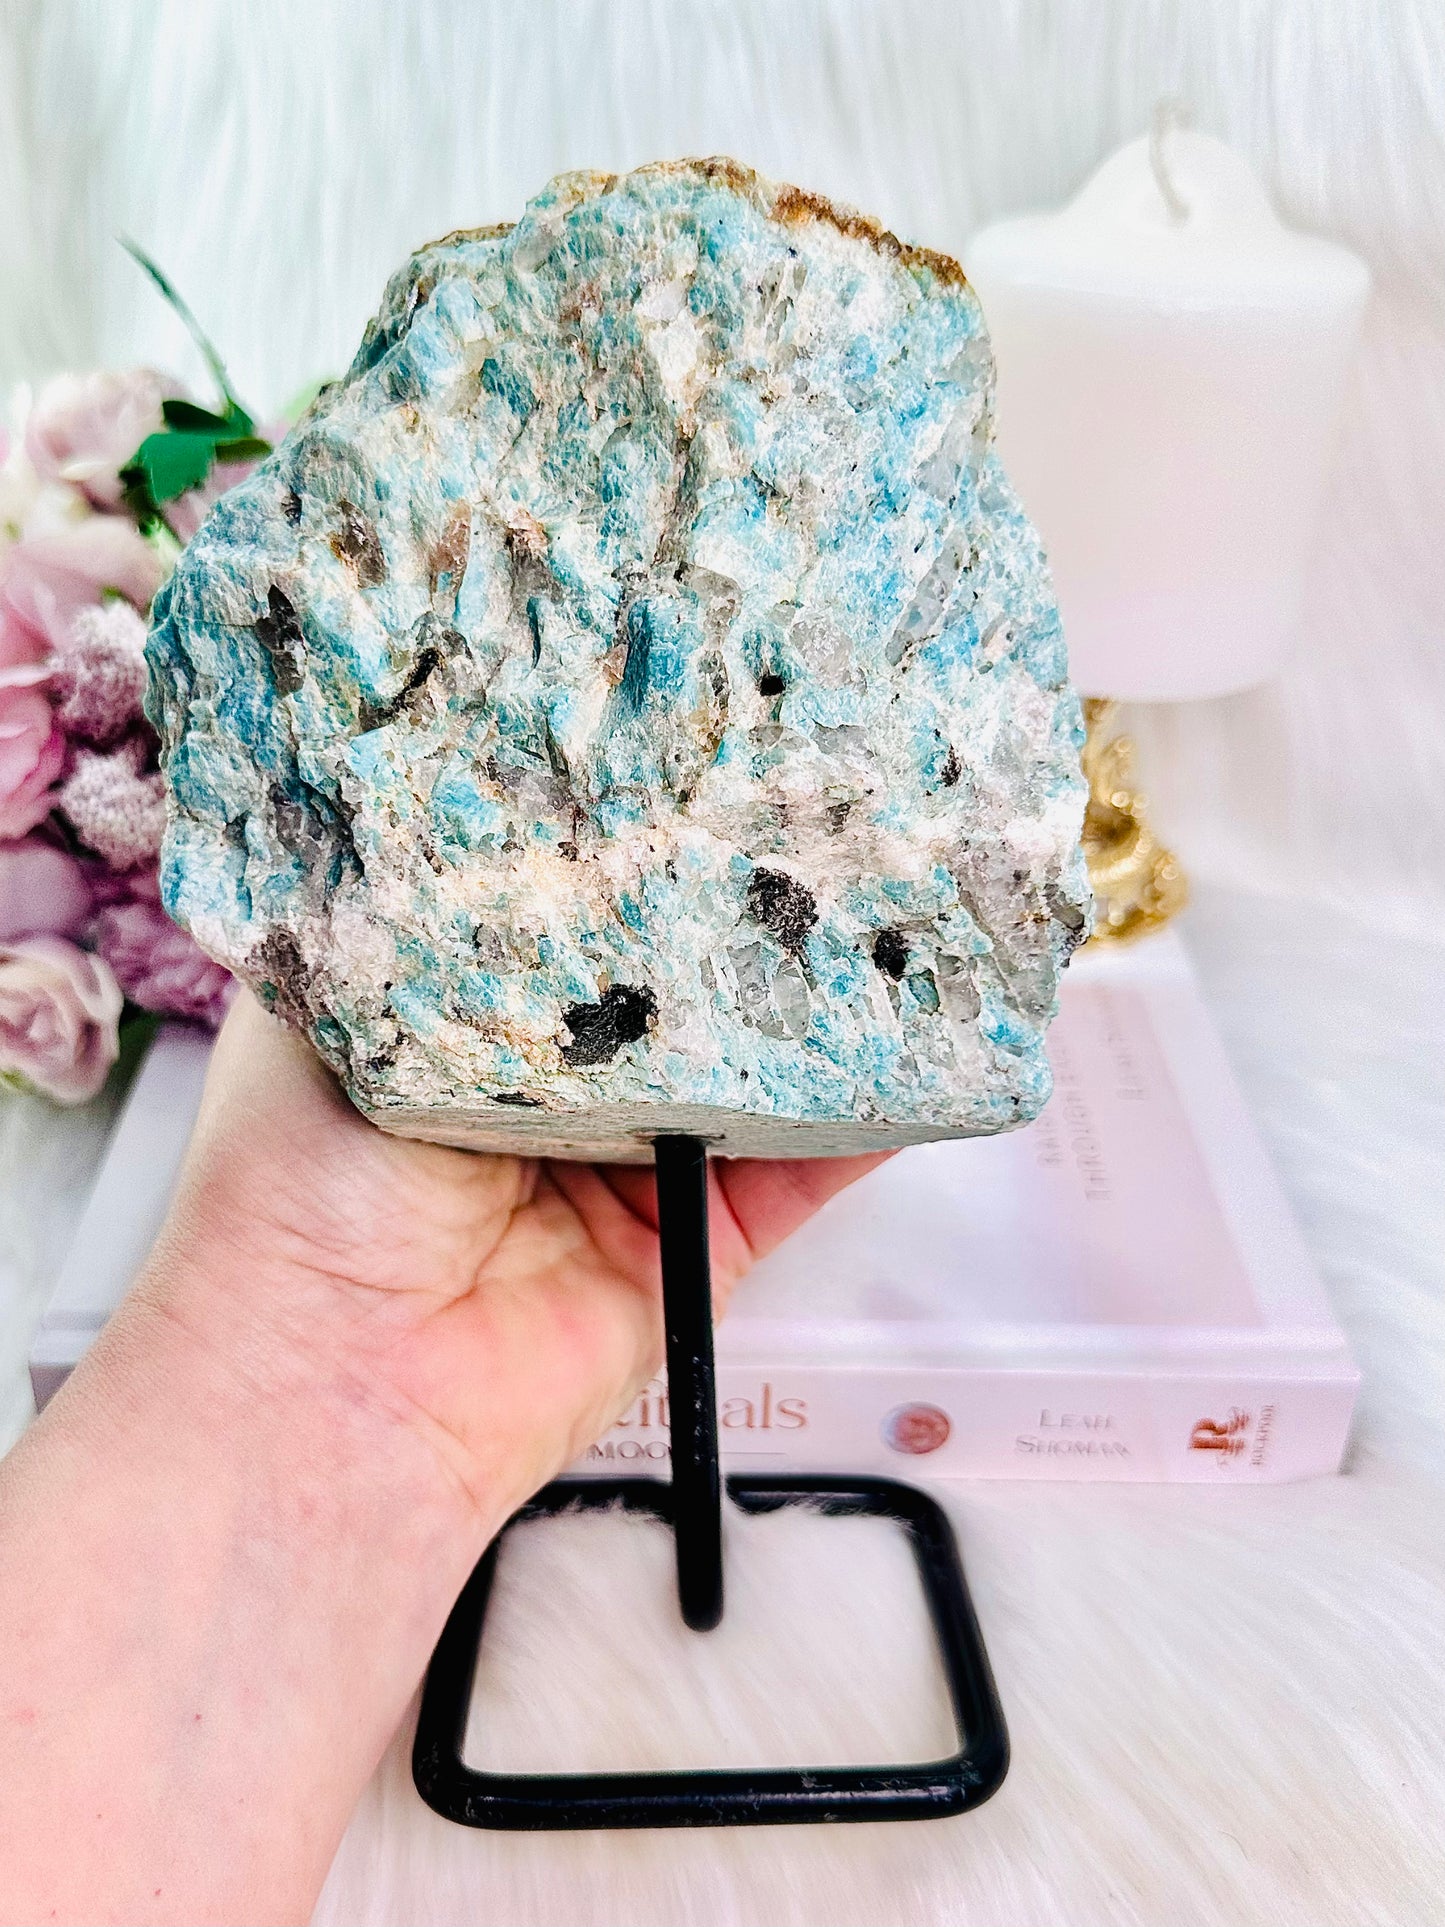 Huge Amazing Raw Rough Natural Amazonite With Smokey Quartz Inclusions 1.56KG 20cm On Stand From Brazil